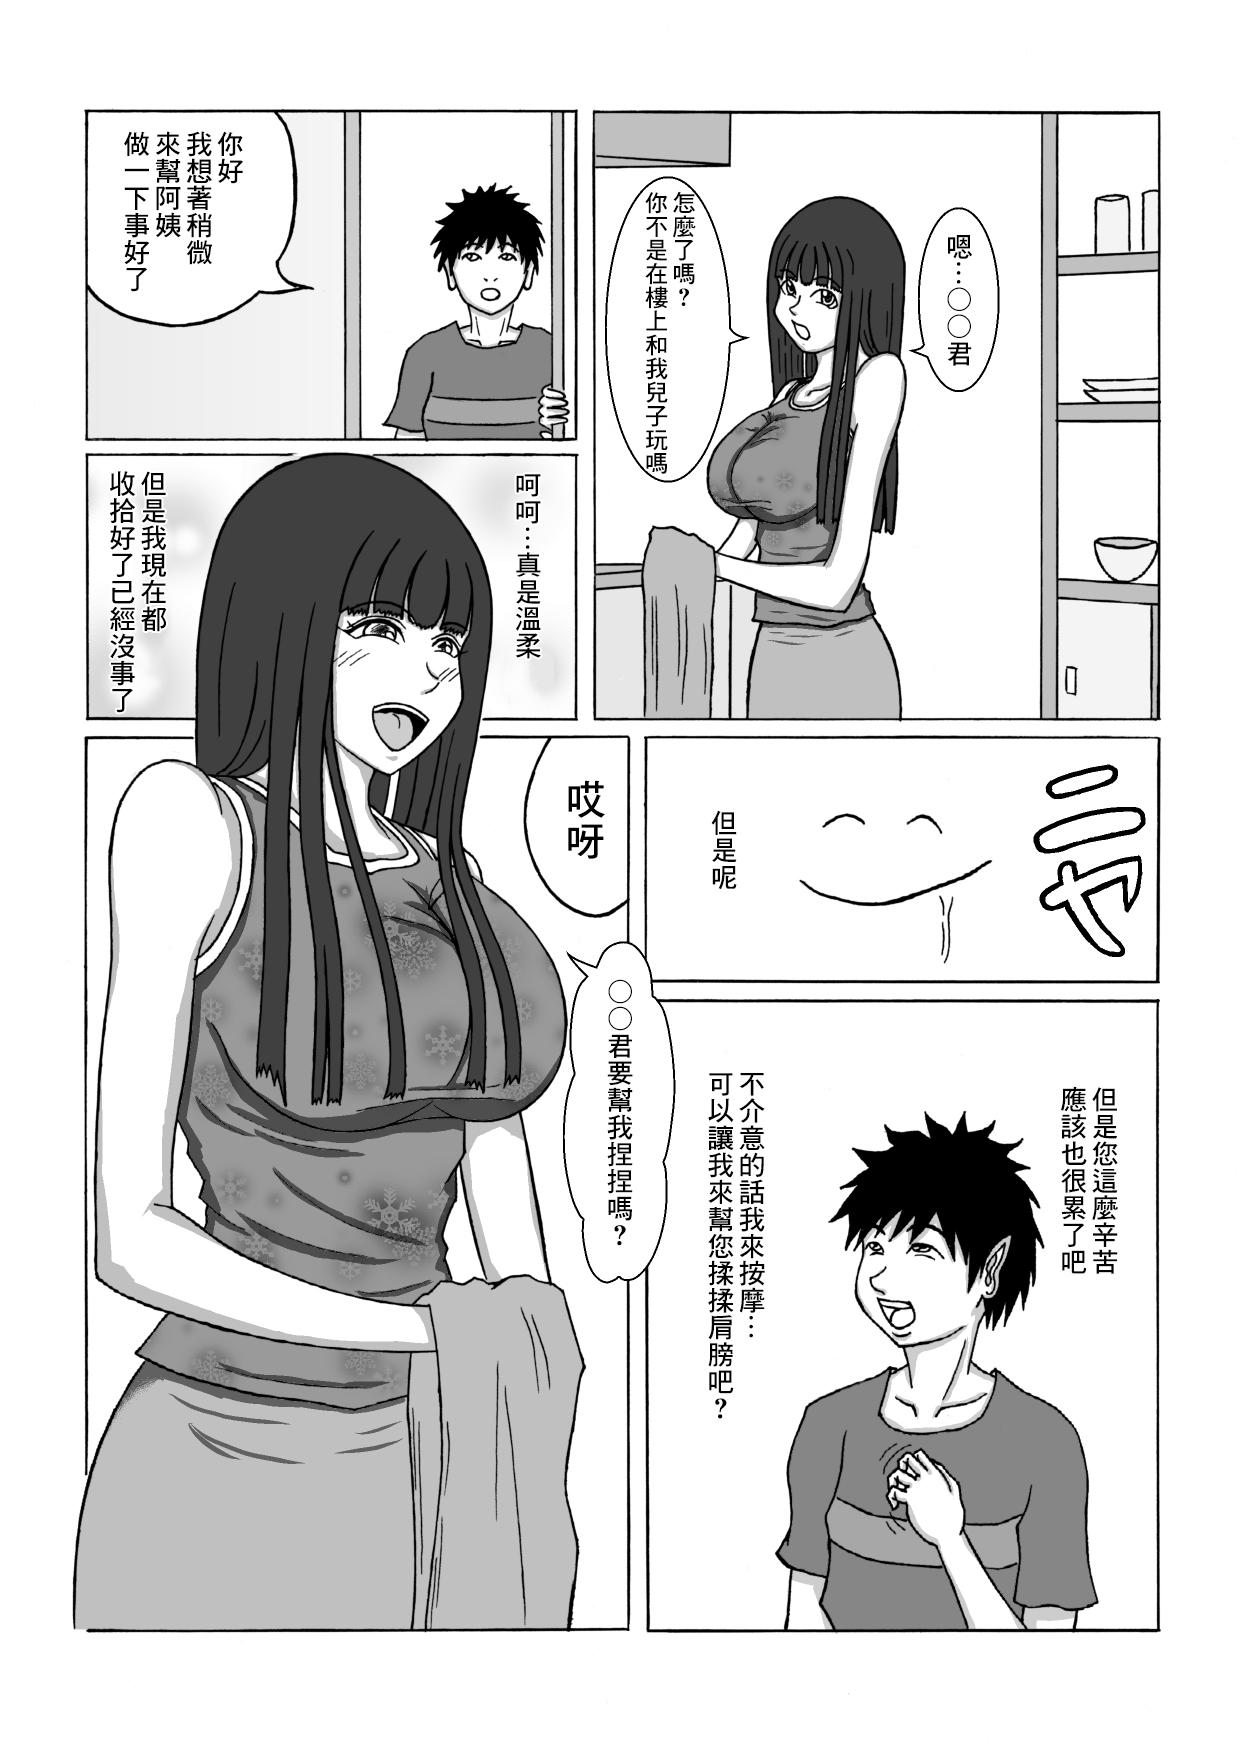 Doggy Style 和朋友的母親 Piroca - Page 2